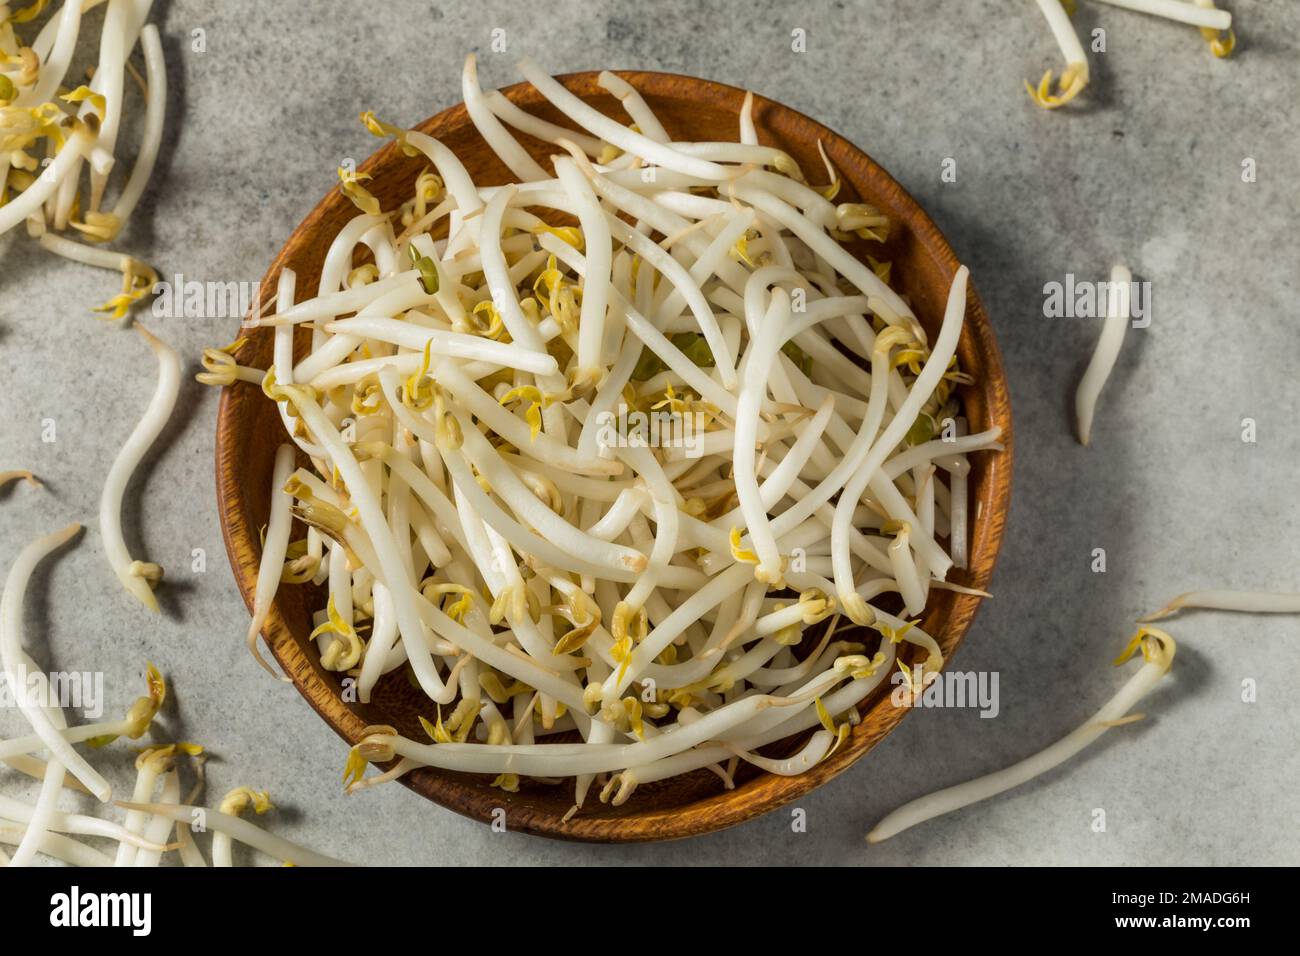 Raw White Organic Soy Bean Sprouts in a Bowl Stock Photo